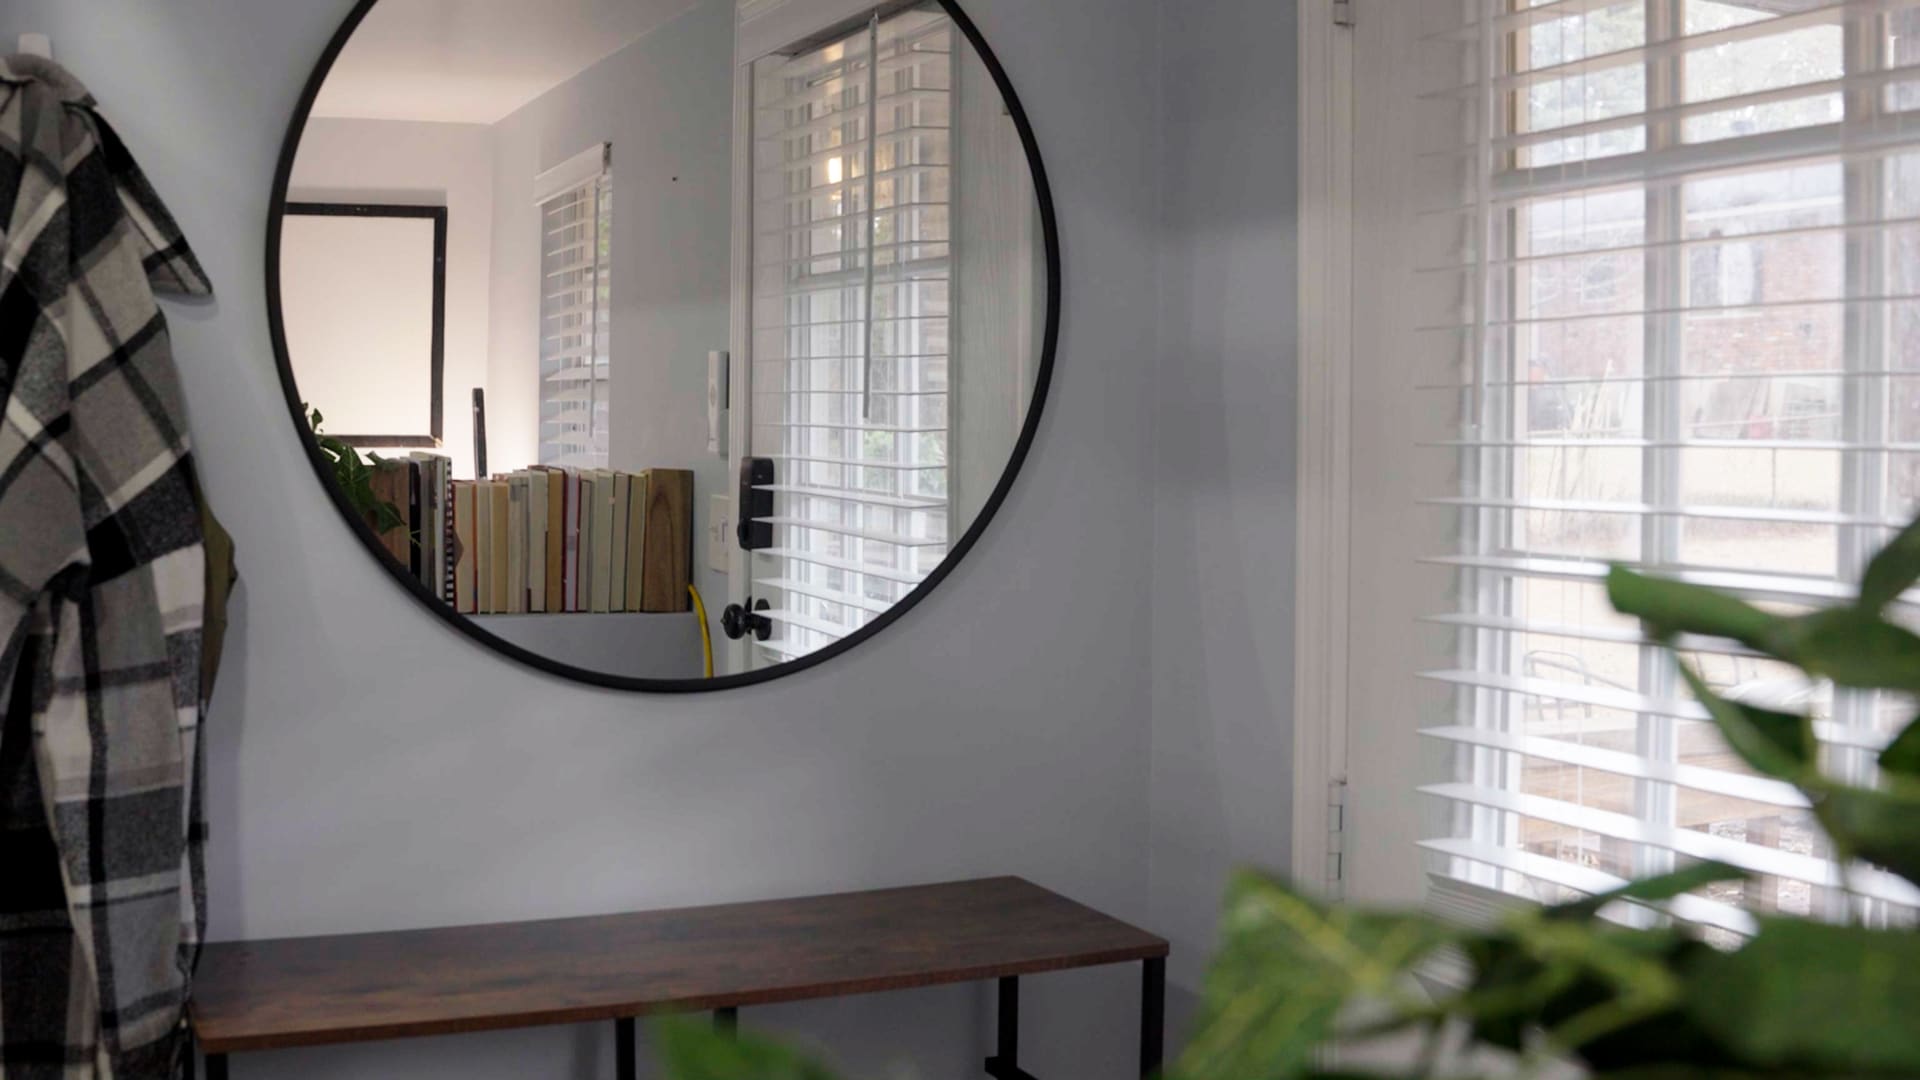 Small details like this mirror make the space feel larger and more homey. 